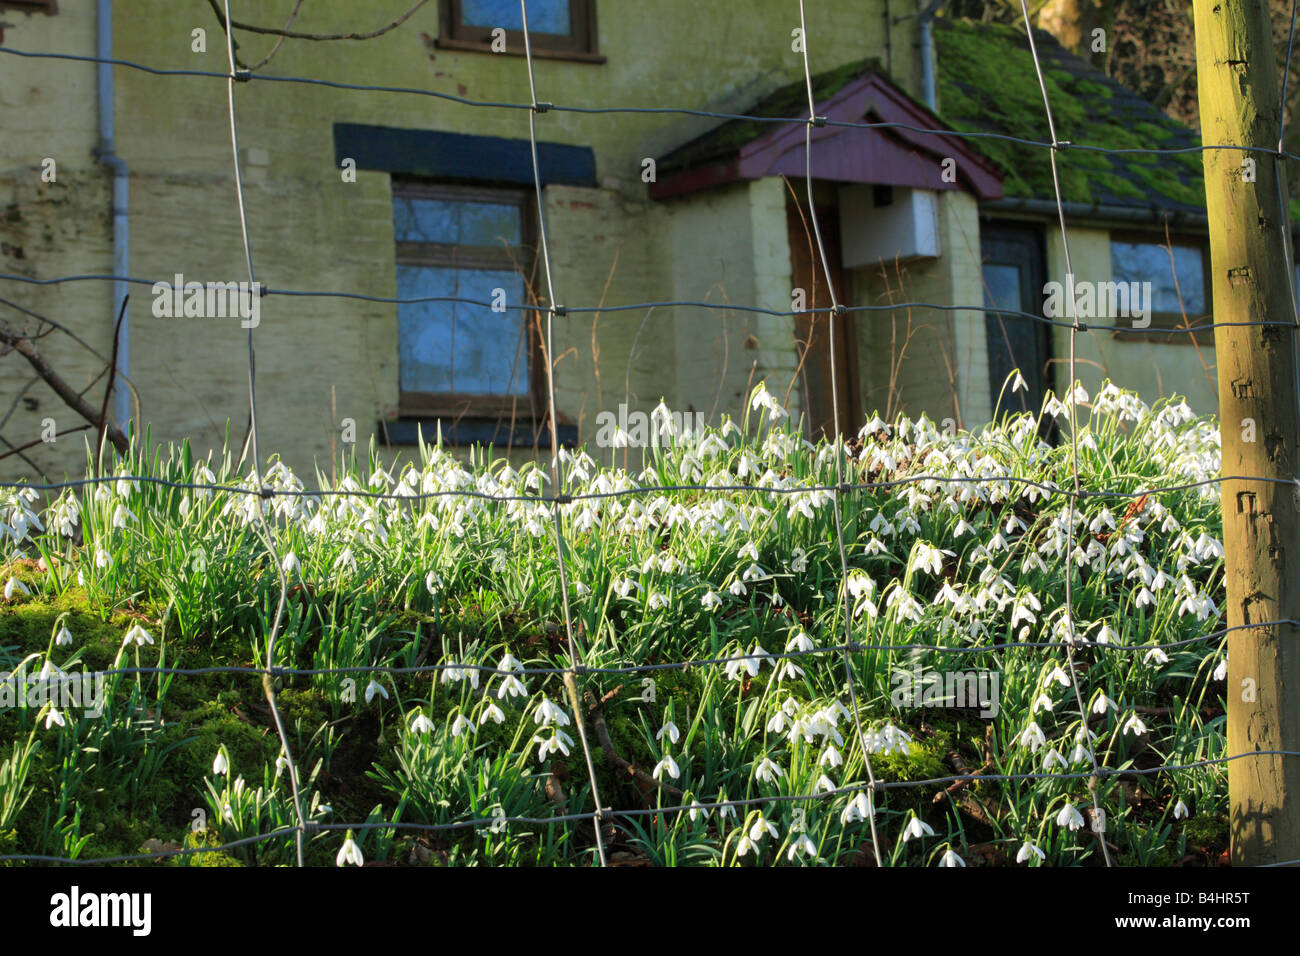 Naturalized Snowdrops (Galanthus nivalis) flowering in the garden of an abandoned house. Powys, Wales, UK. Stock Photo